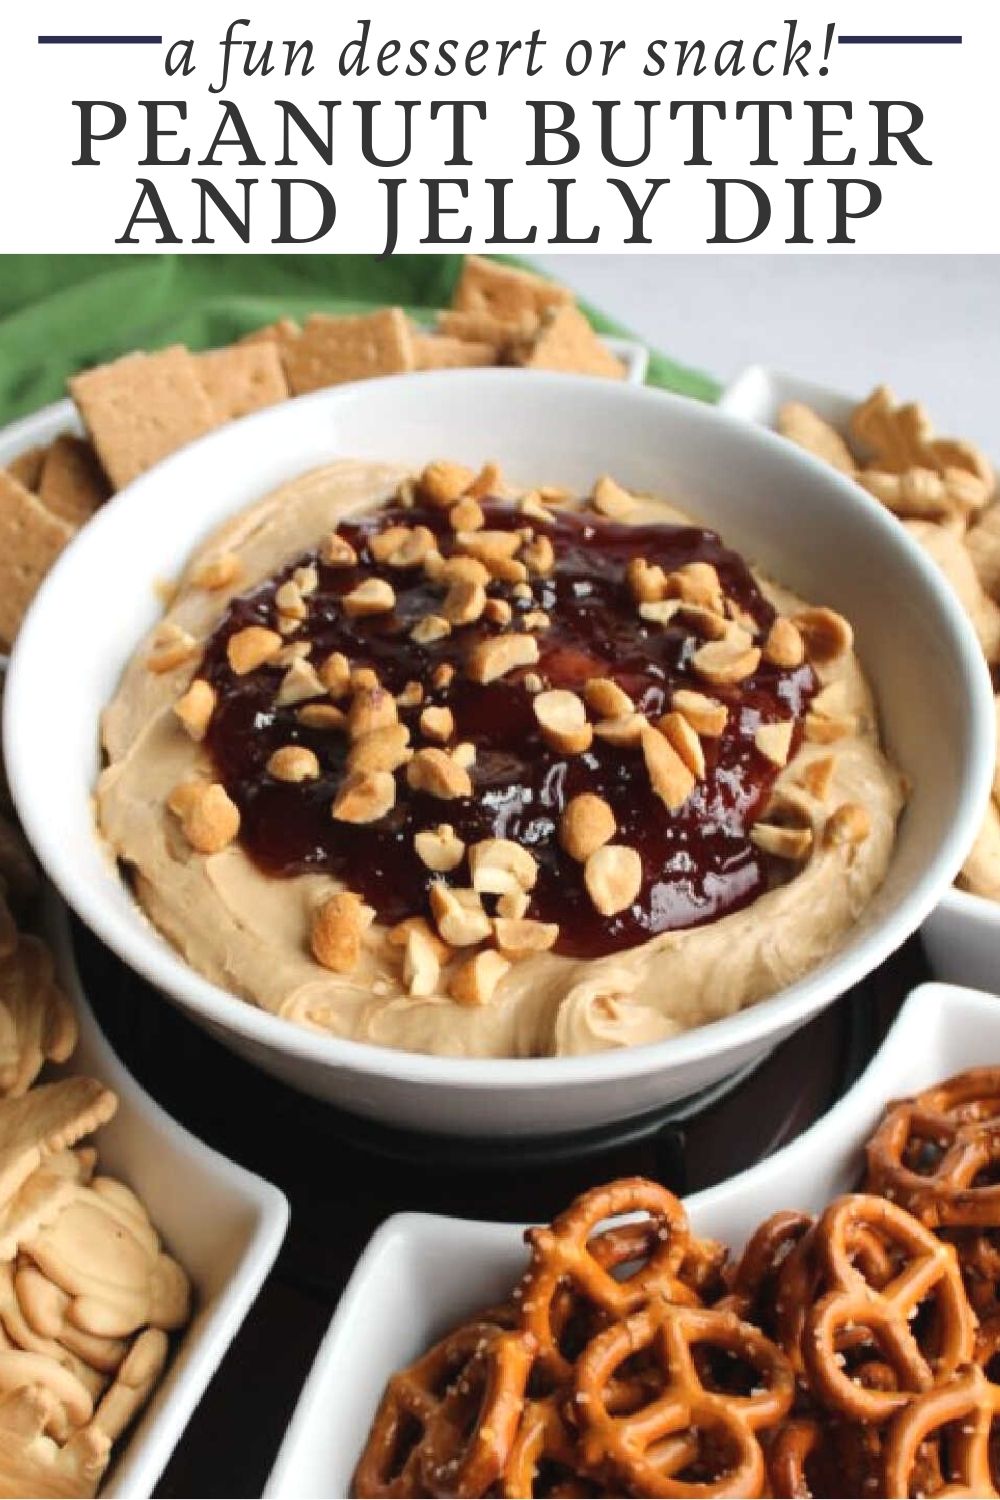 This fun peanut butter and jelly dip is loaded with the flavors of childhood. It is light and creamy, not too sweet and super fun. Make it for your next get together to see for yourself!